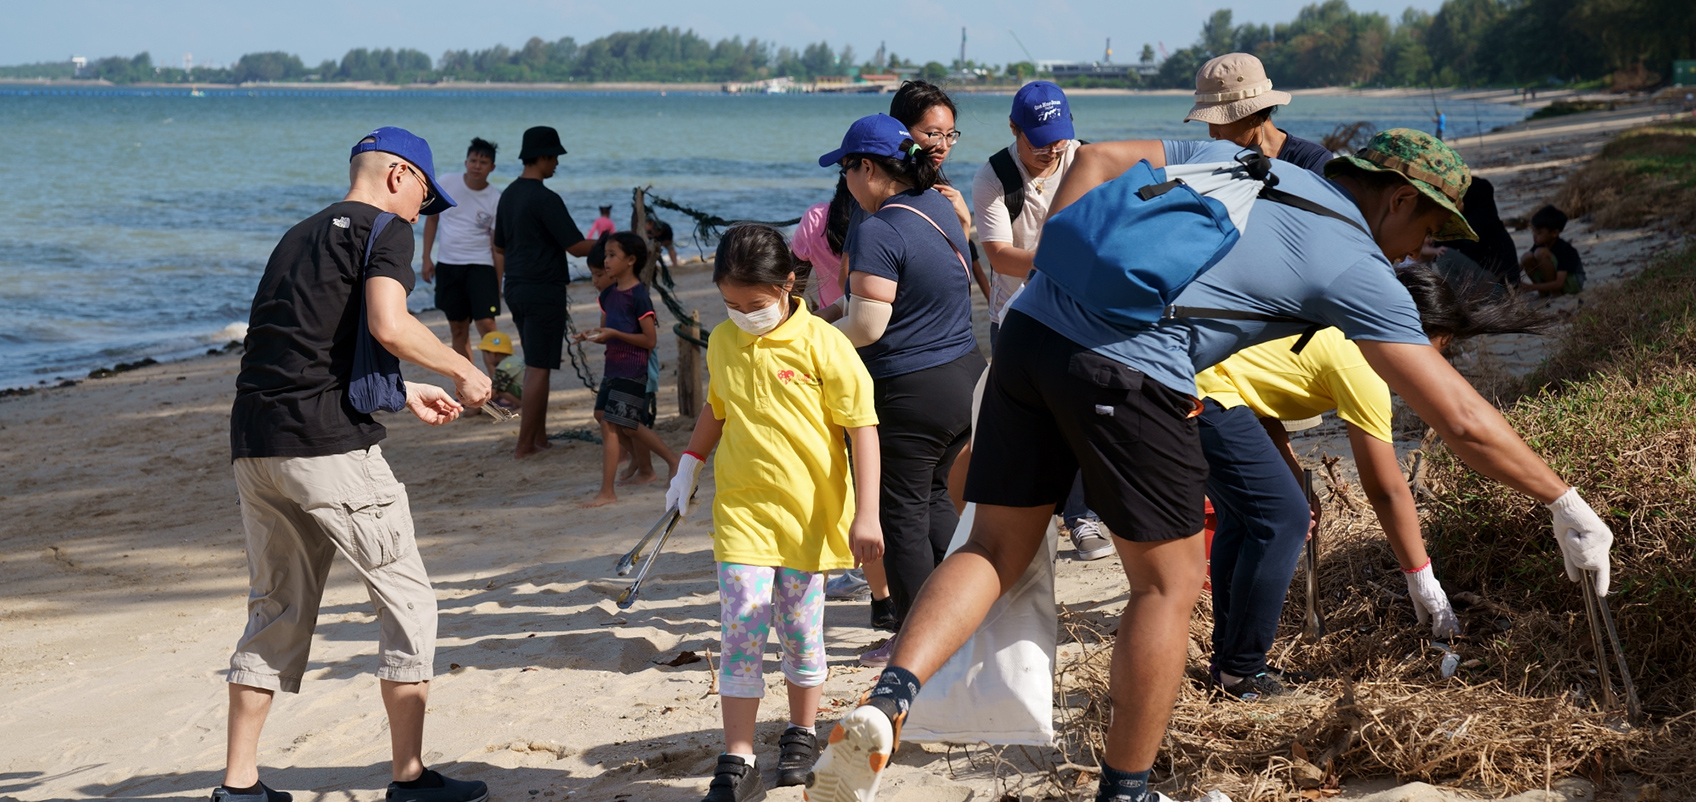 Employees are cleaning up at the beach with some children